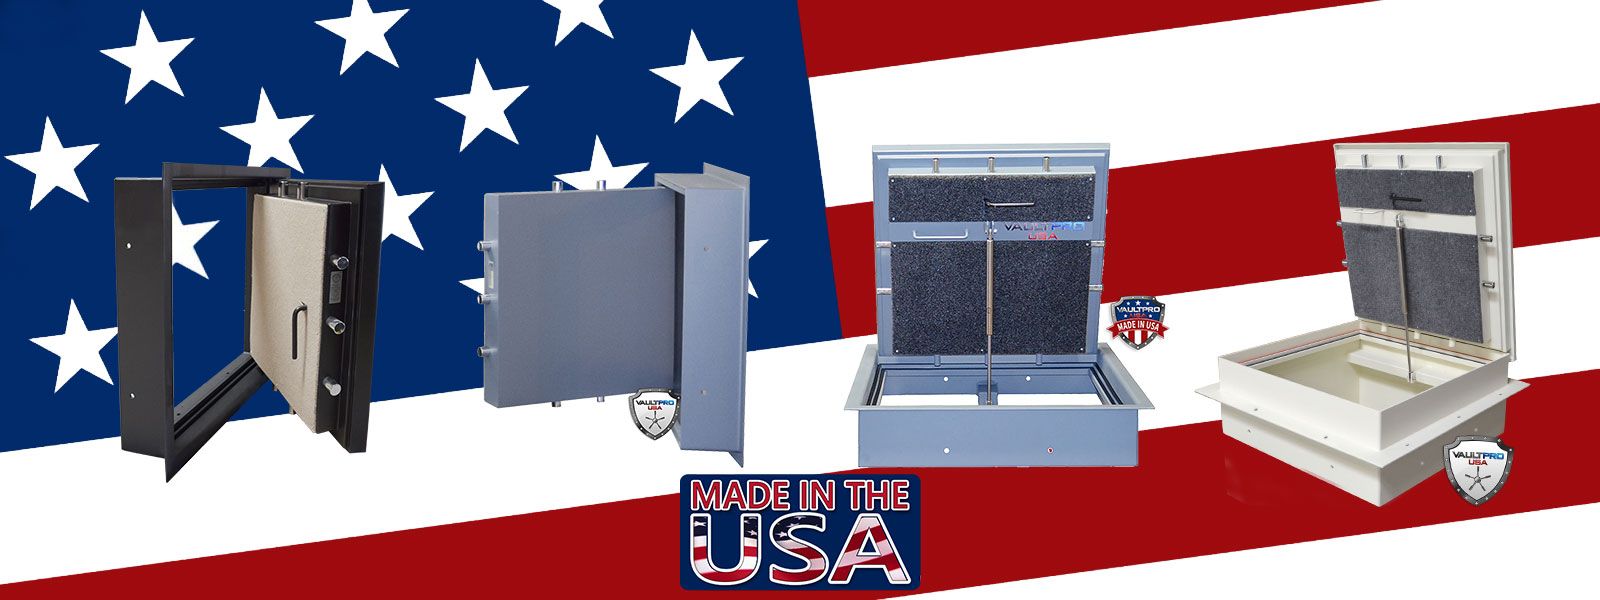 Emergency Escape Hatches Wall Hatches | Roof Hatches | Floor Hatches For Safe Rooms and Storm Shelters made in America by Vault Pro USA